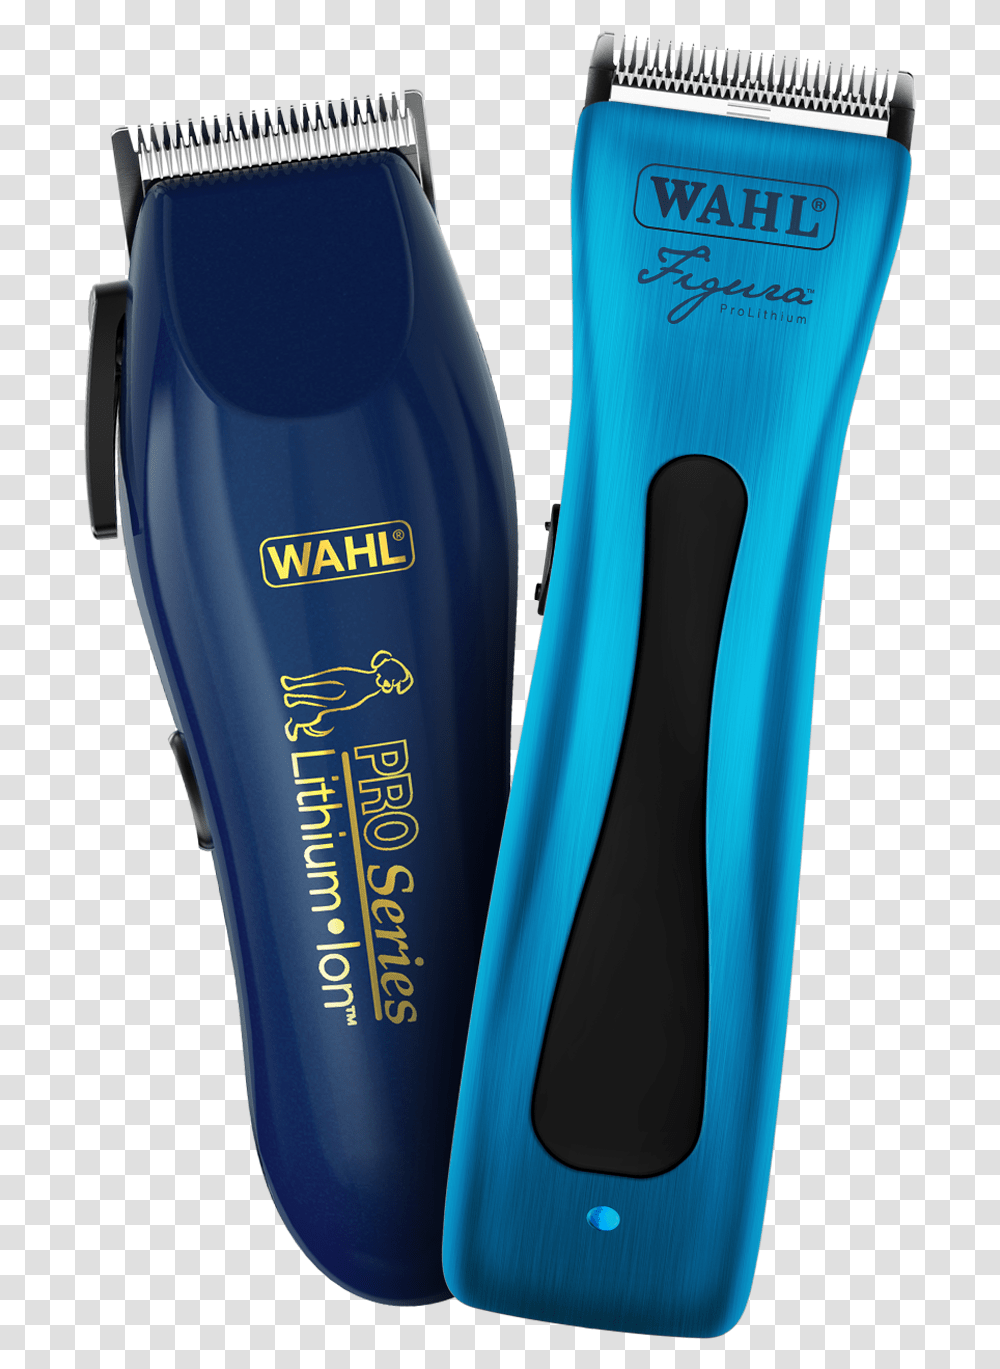 Wahl 5 In 1 Dog Clipper Blade Attachment Petbarn Grooming Trimmer, Bottle, Cosmetics Transparent Png